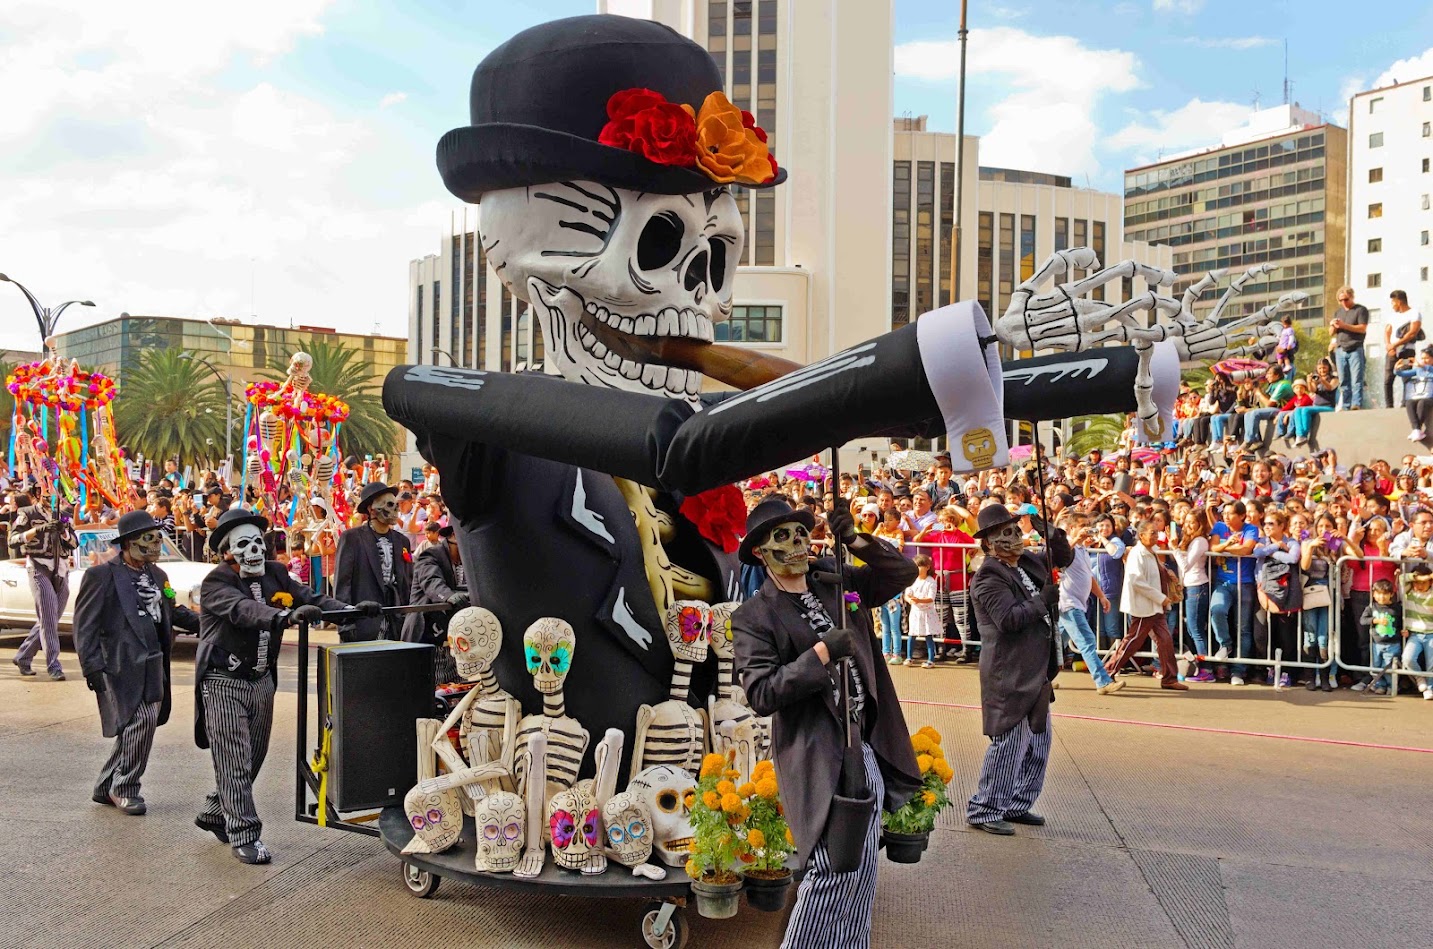 Tour of the Day of the Dead in Mexico City